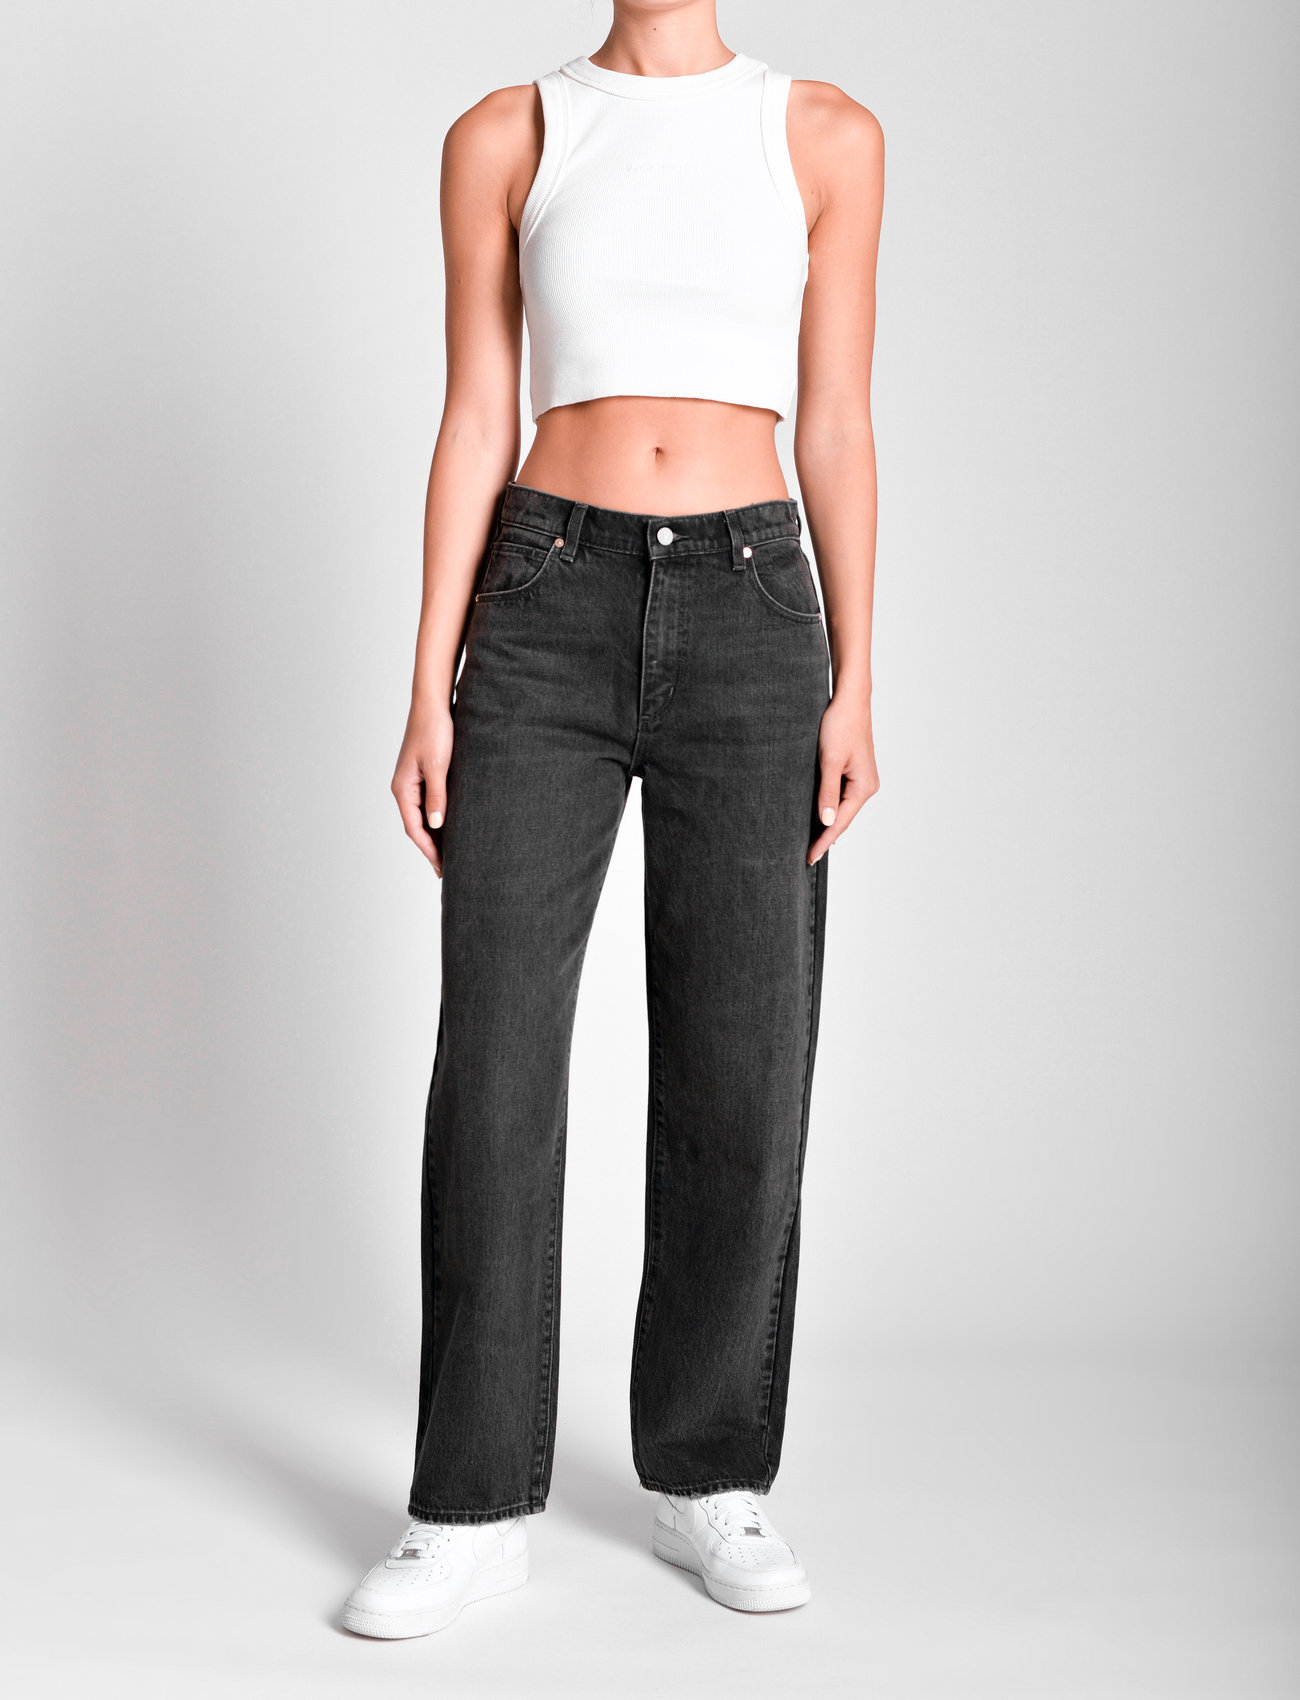 ABRAND - SLOUCH JEAN DARCY - wide leg jeans - black - 1